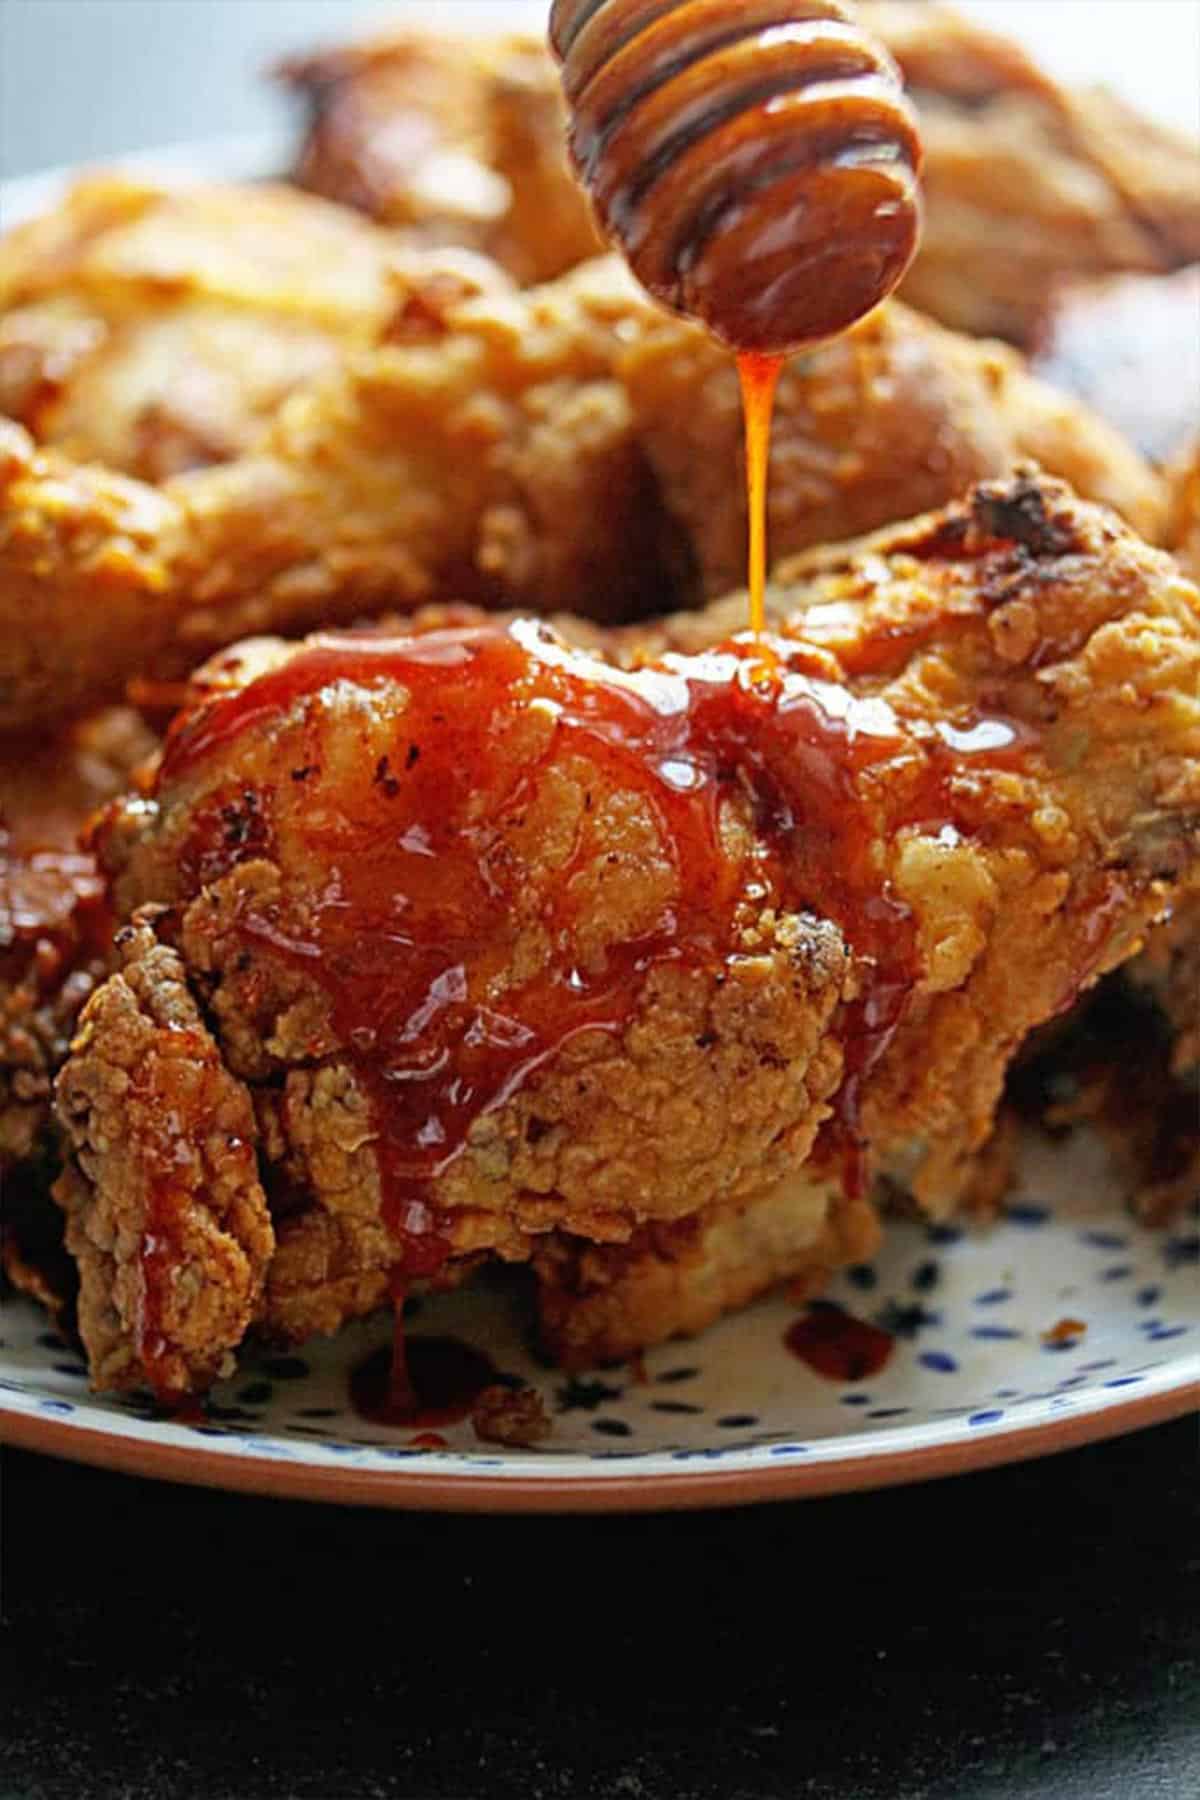 Cayenne spiced honey glaze is drizzled over buttermilk fried chicken recipe ready to serve.